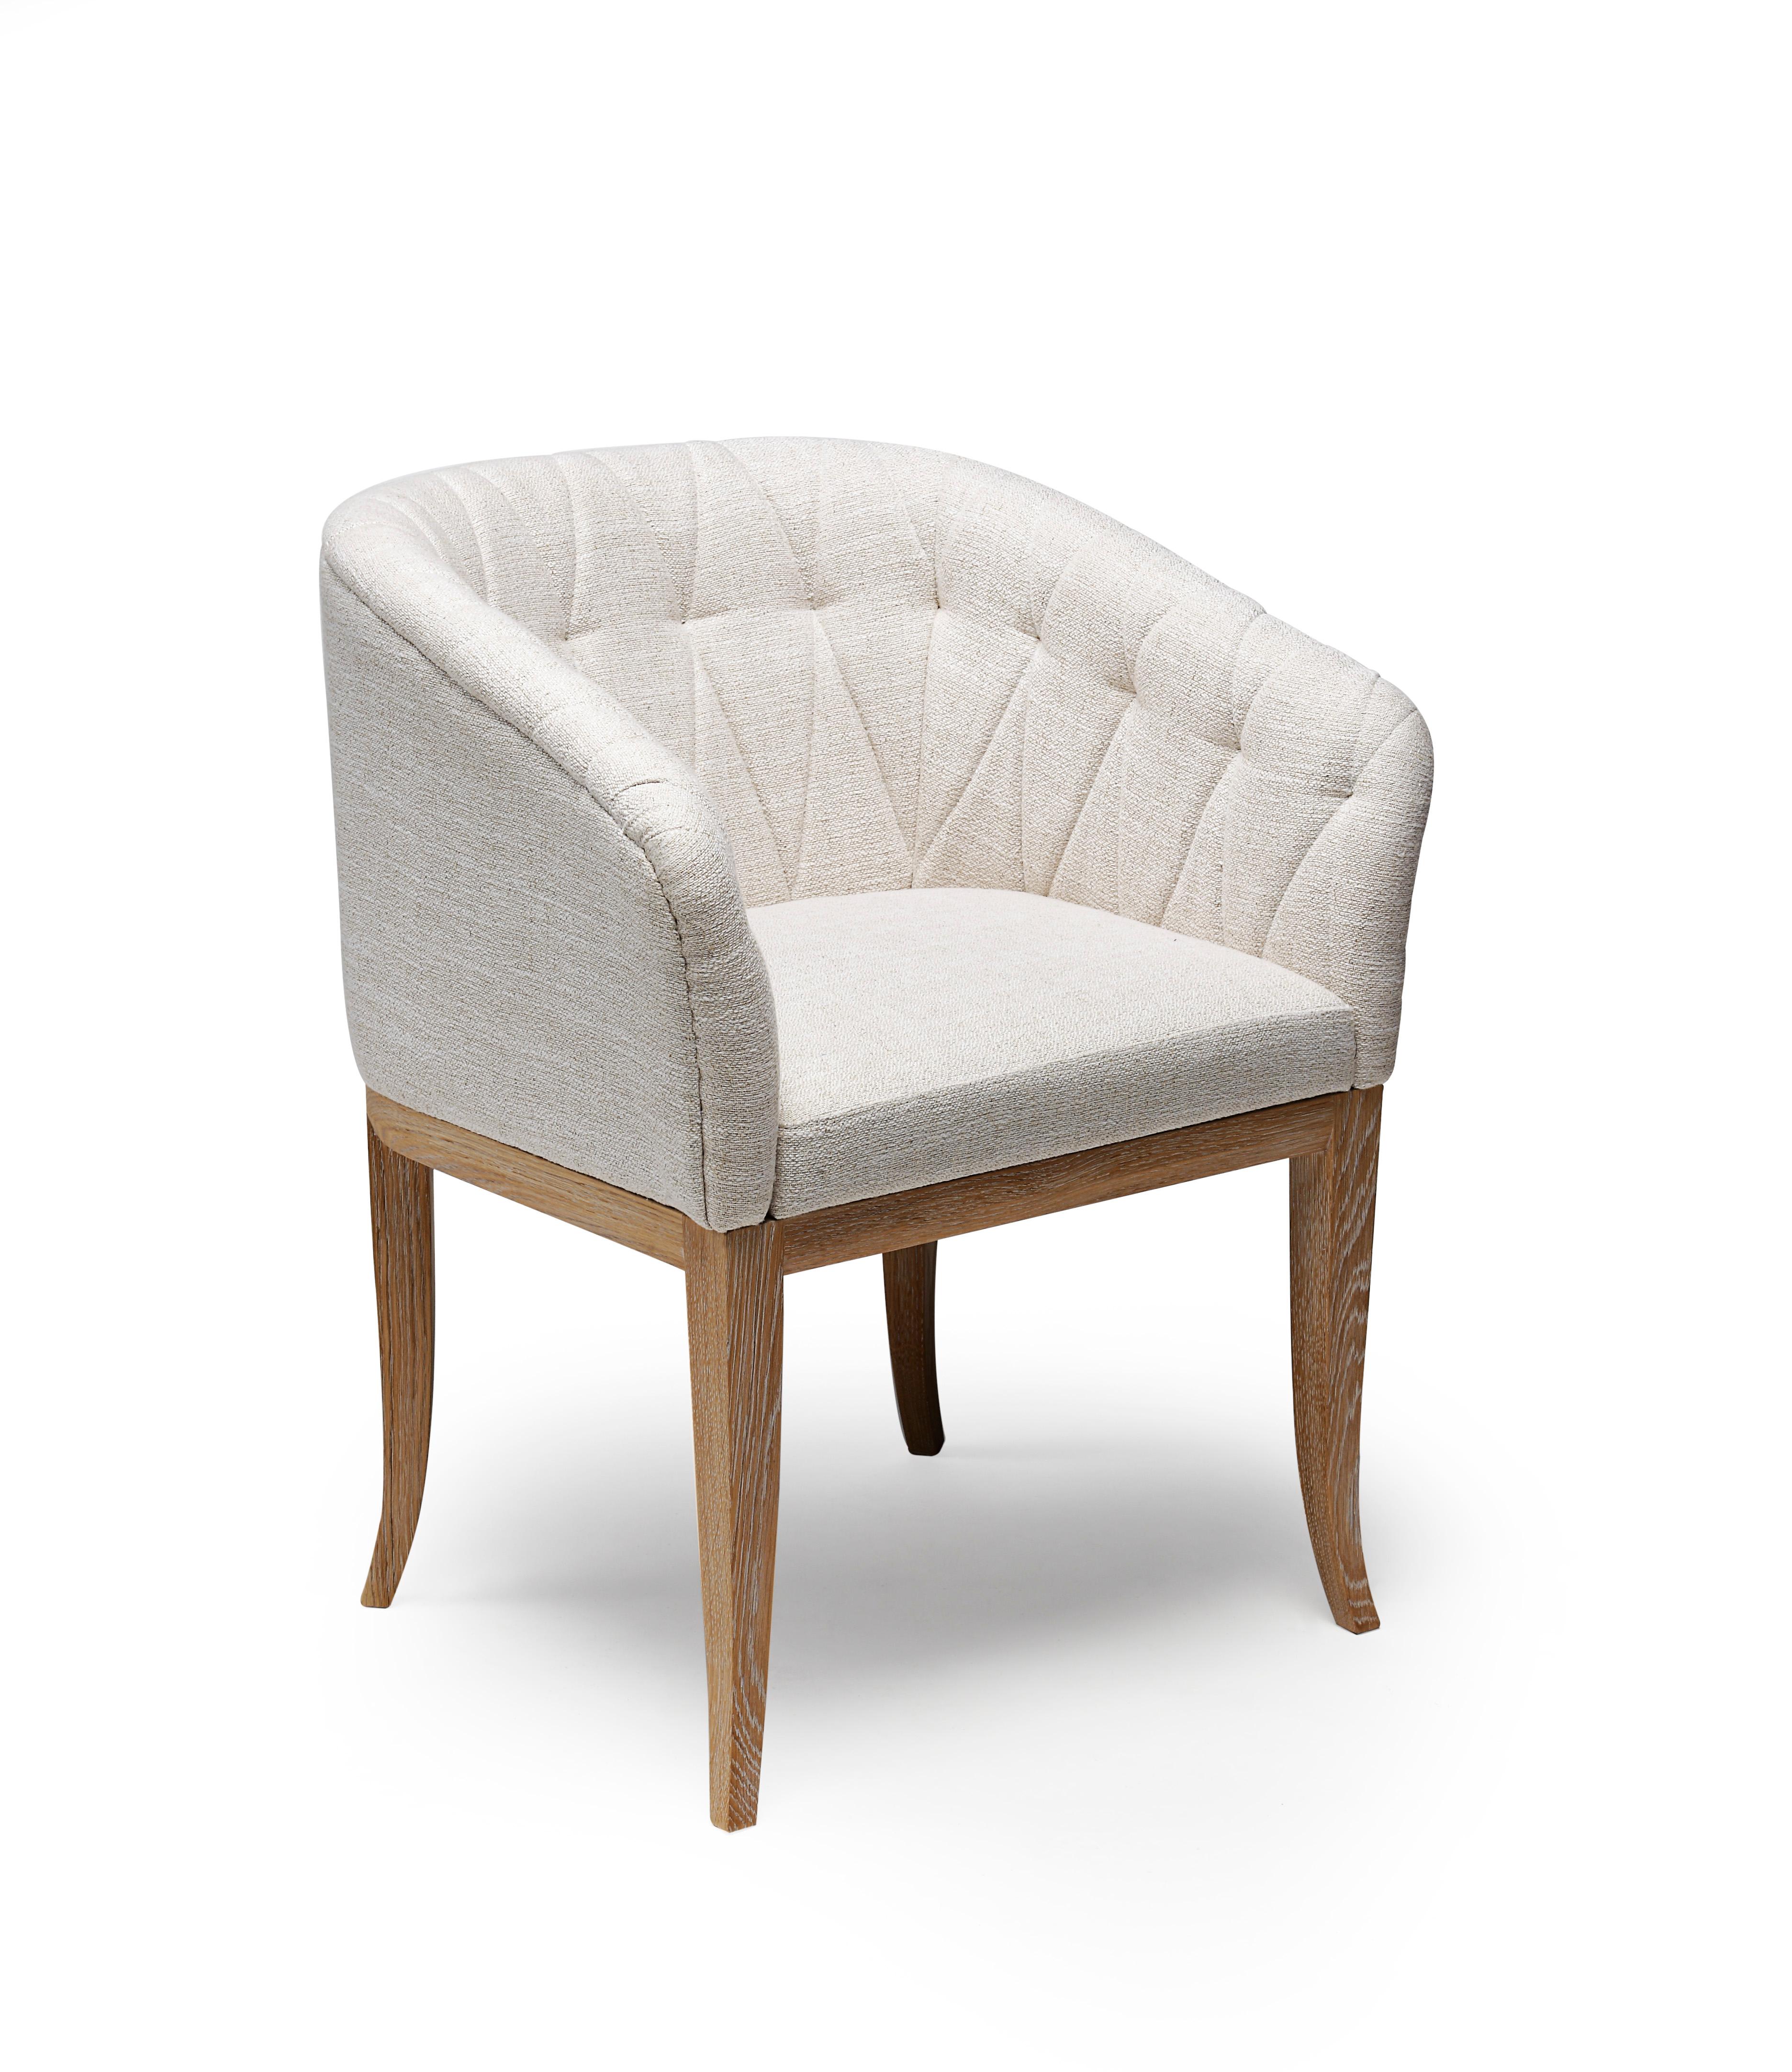 Isabella Chair by Duistt
Dimensions: W 64 x D 58 x H 78 cm
Materials: Duistt Fabric, Natural Limed Oak

Isabella chair, crafted with great attention to detail, presents beautiful curved lines and a fixed tufted back that makes a statement in any